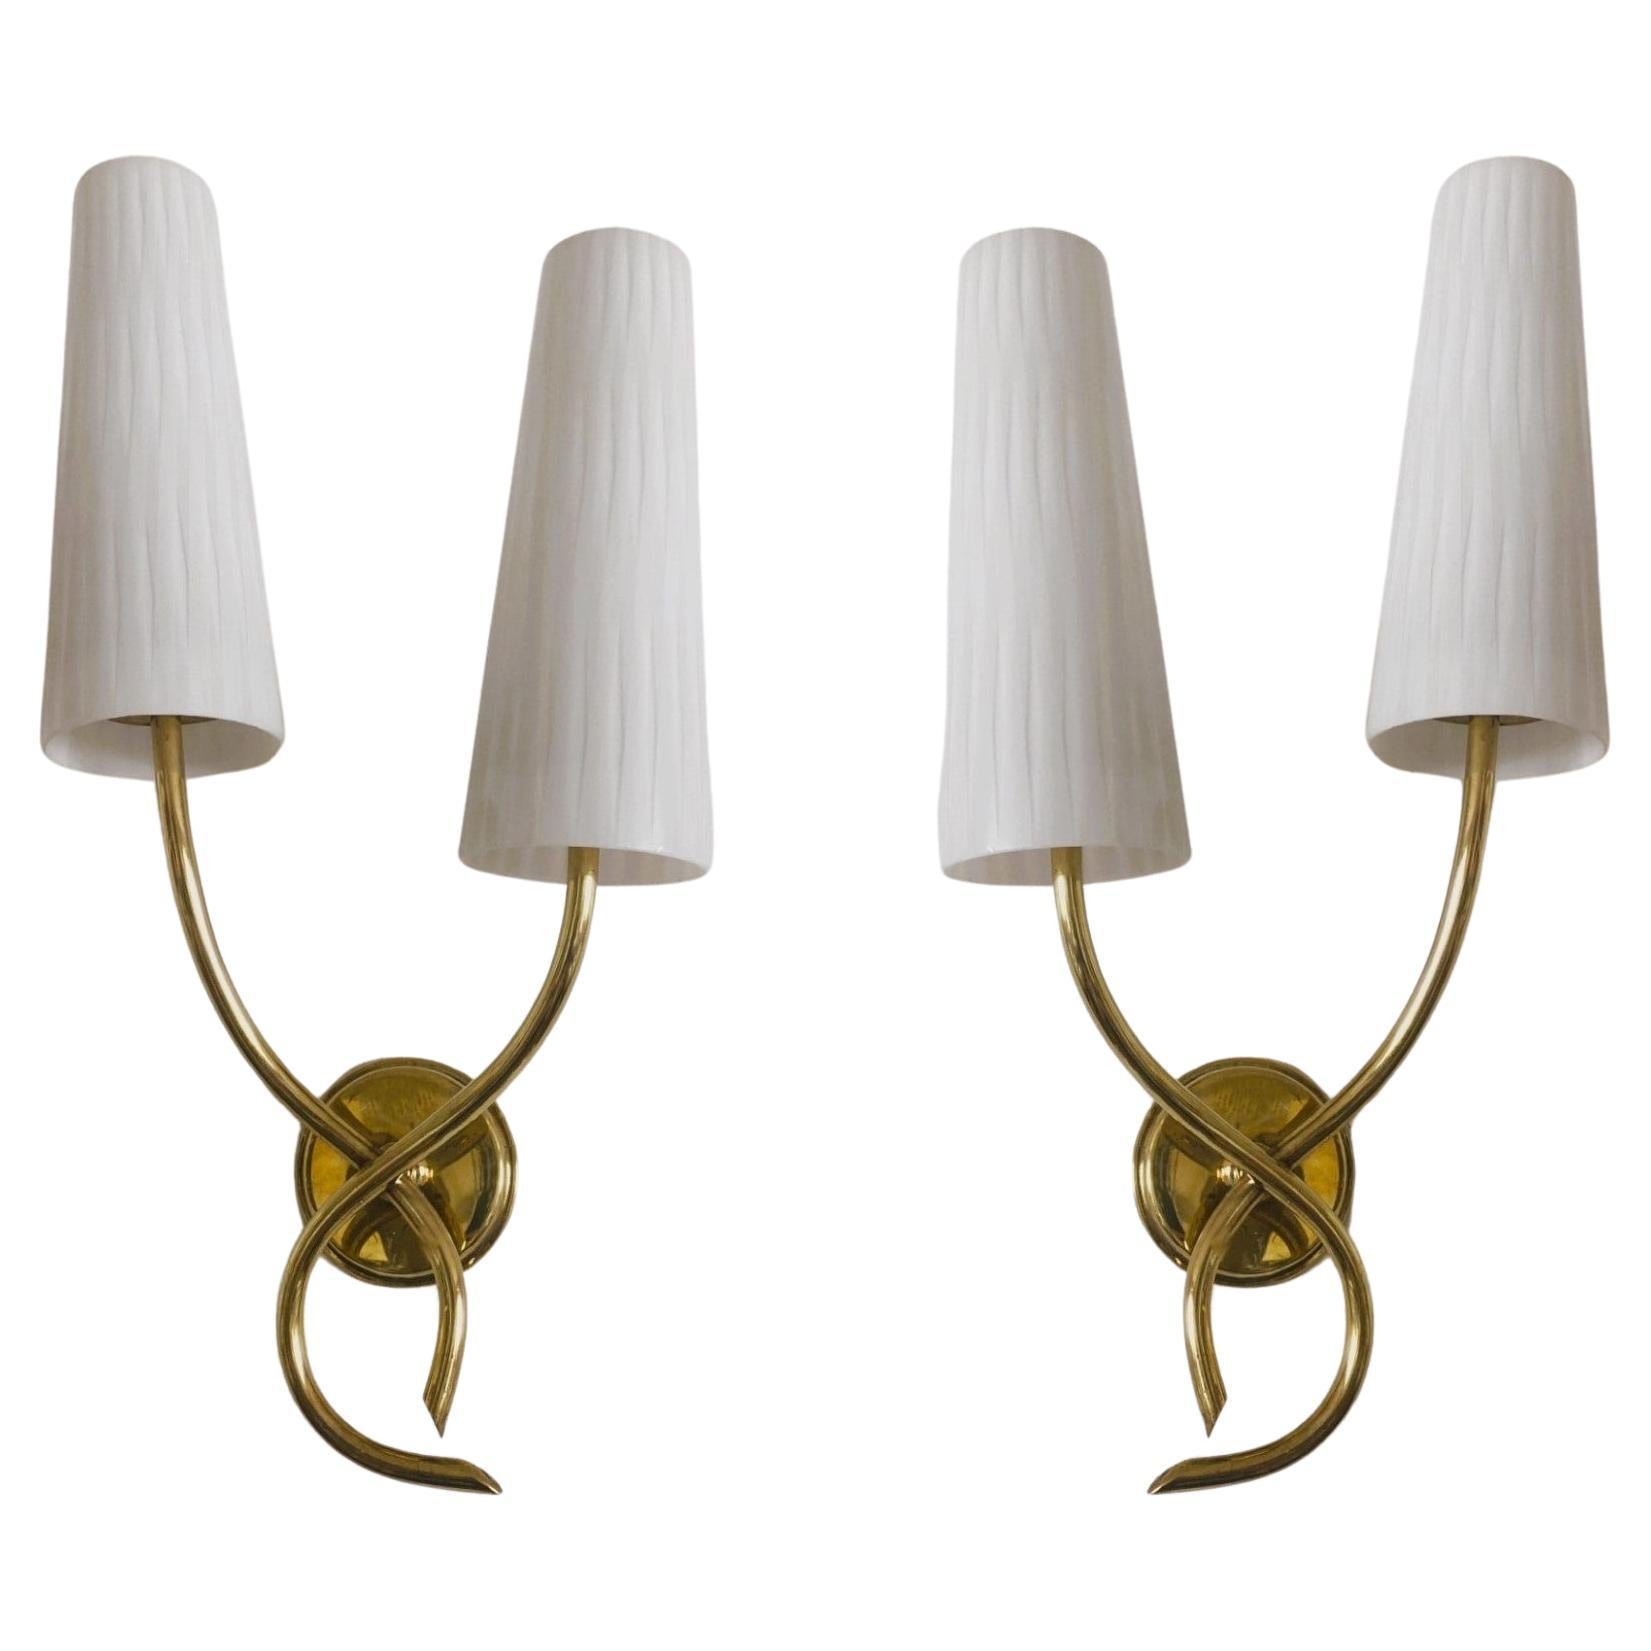 Pair of French Maison Lunel Brass Opal Glass Two-Light Wall Sconces, 1950s